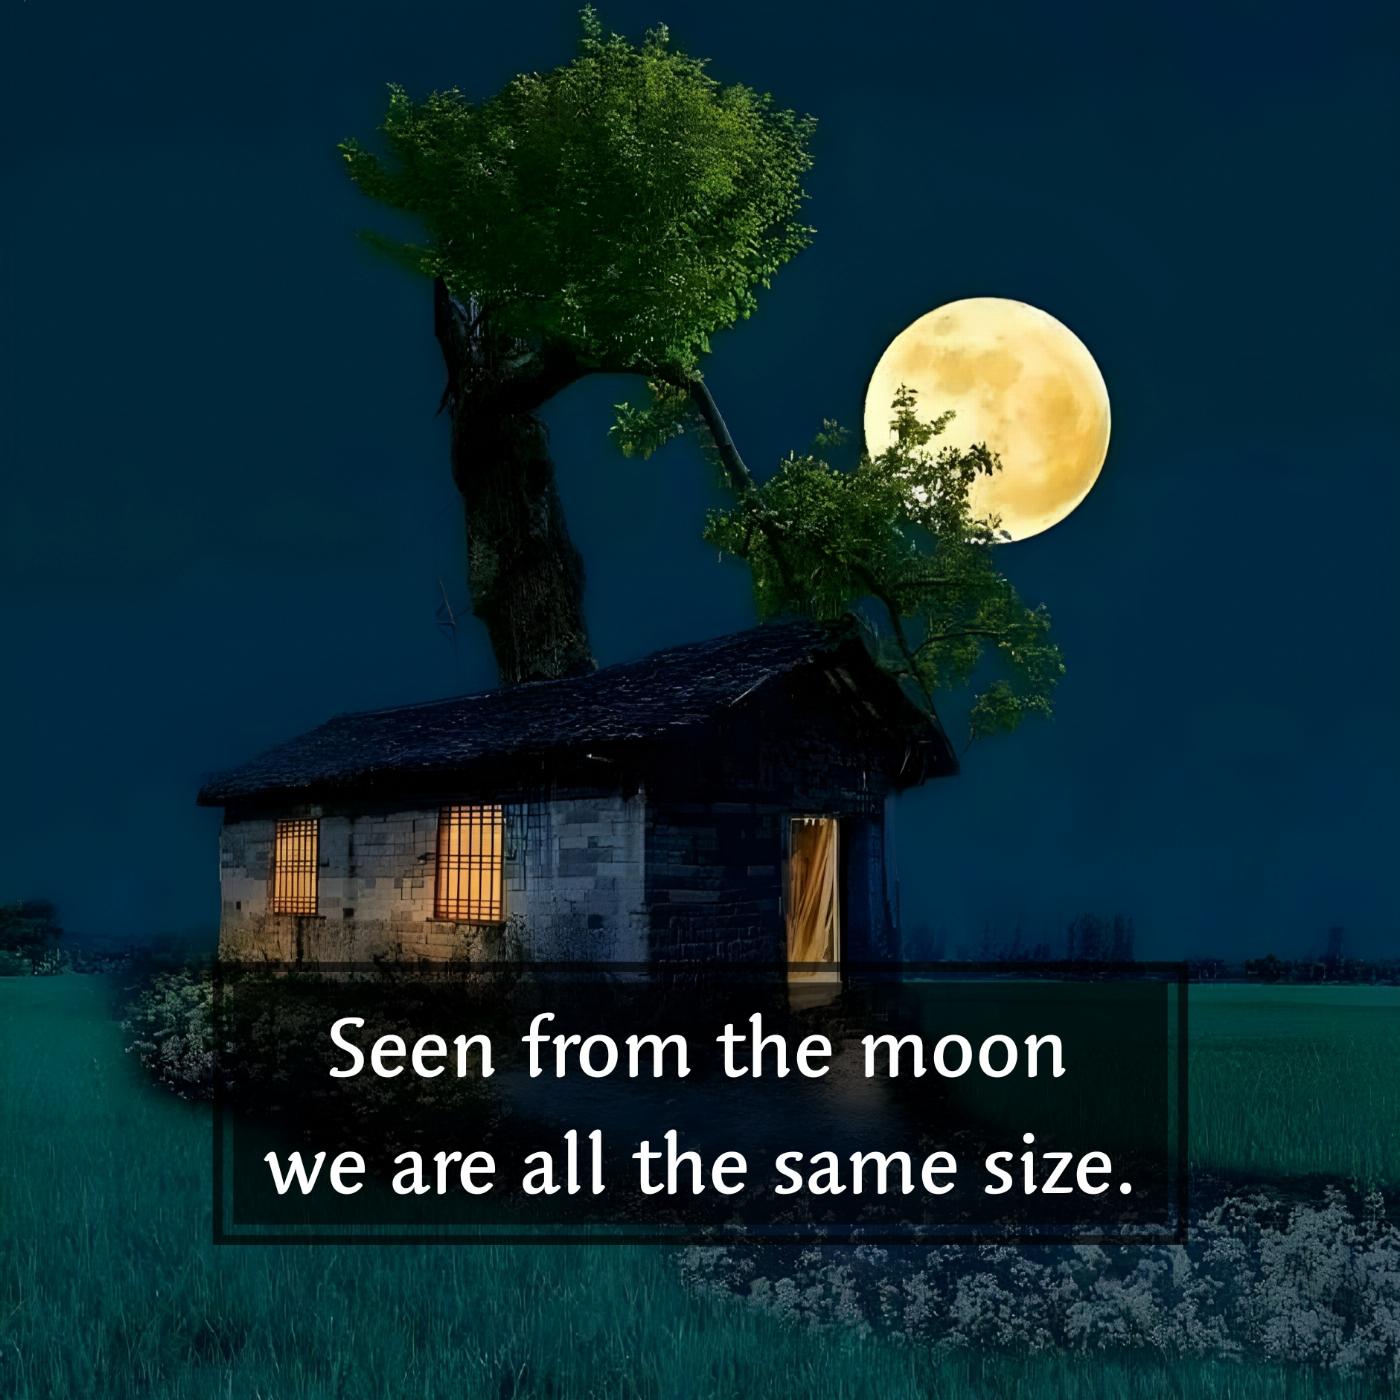 Seen from the moon we are all the same size